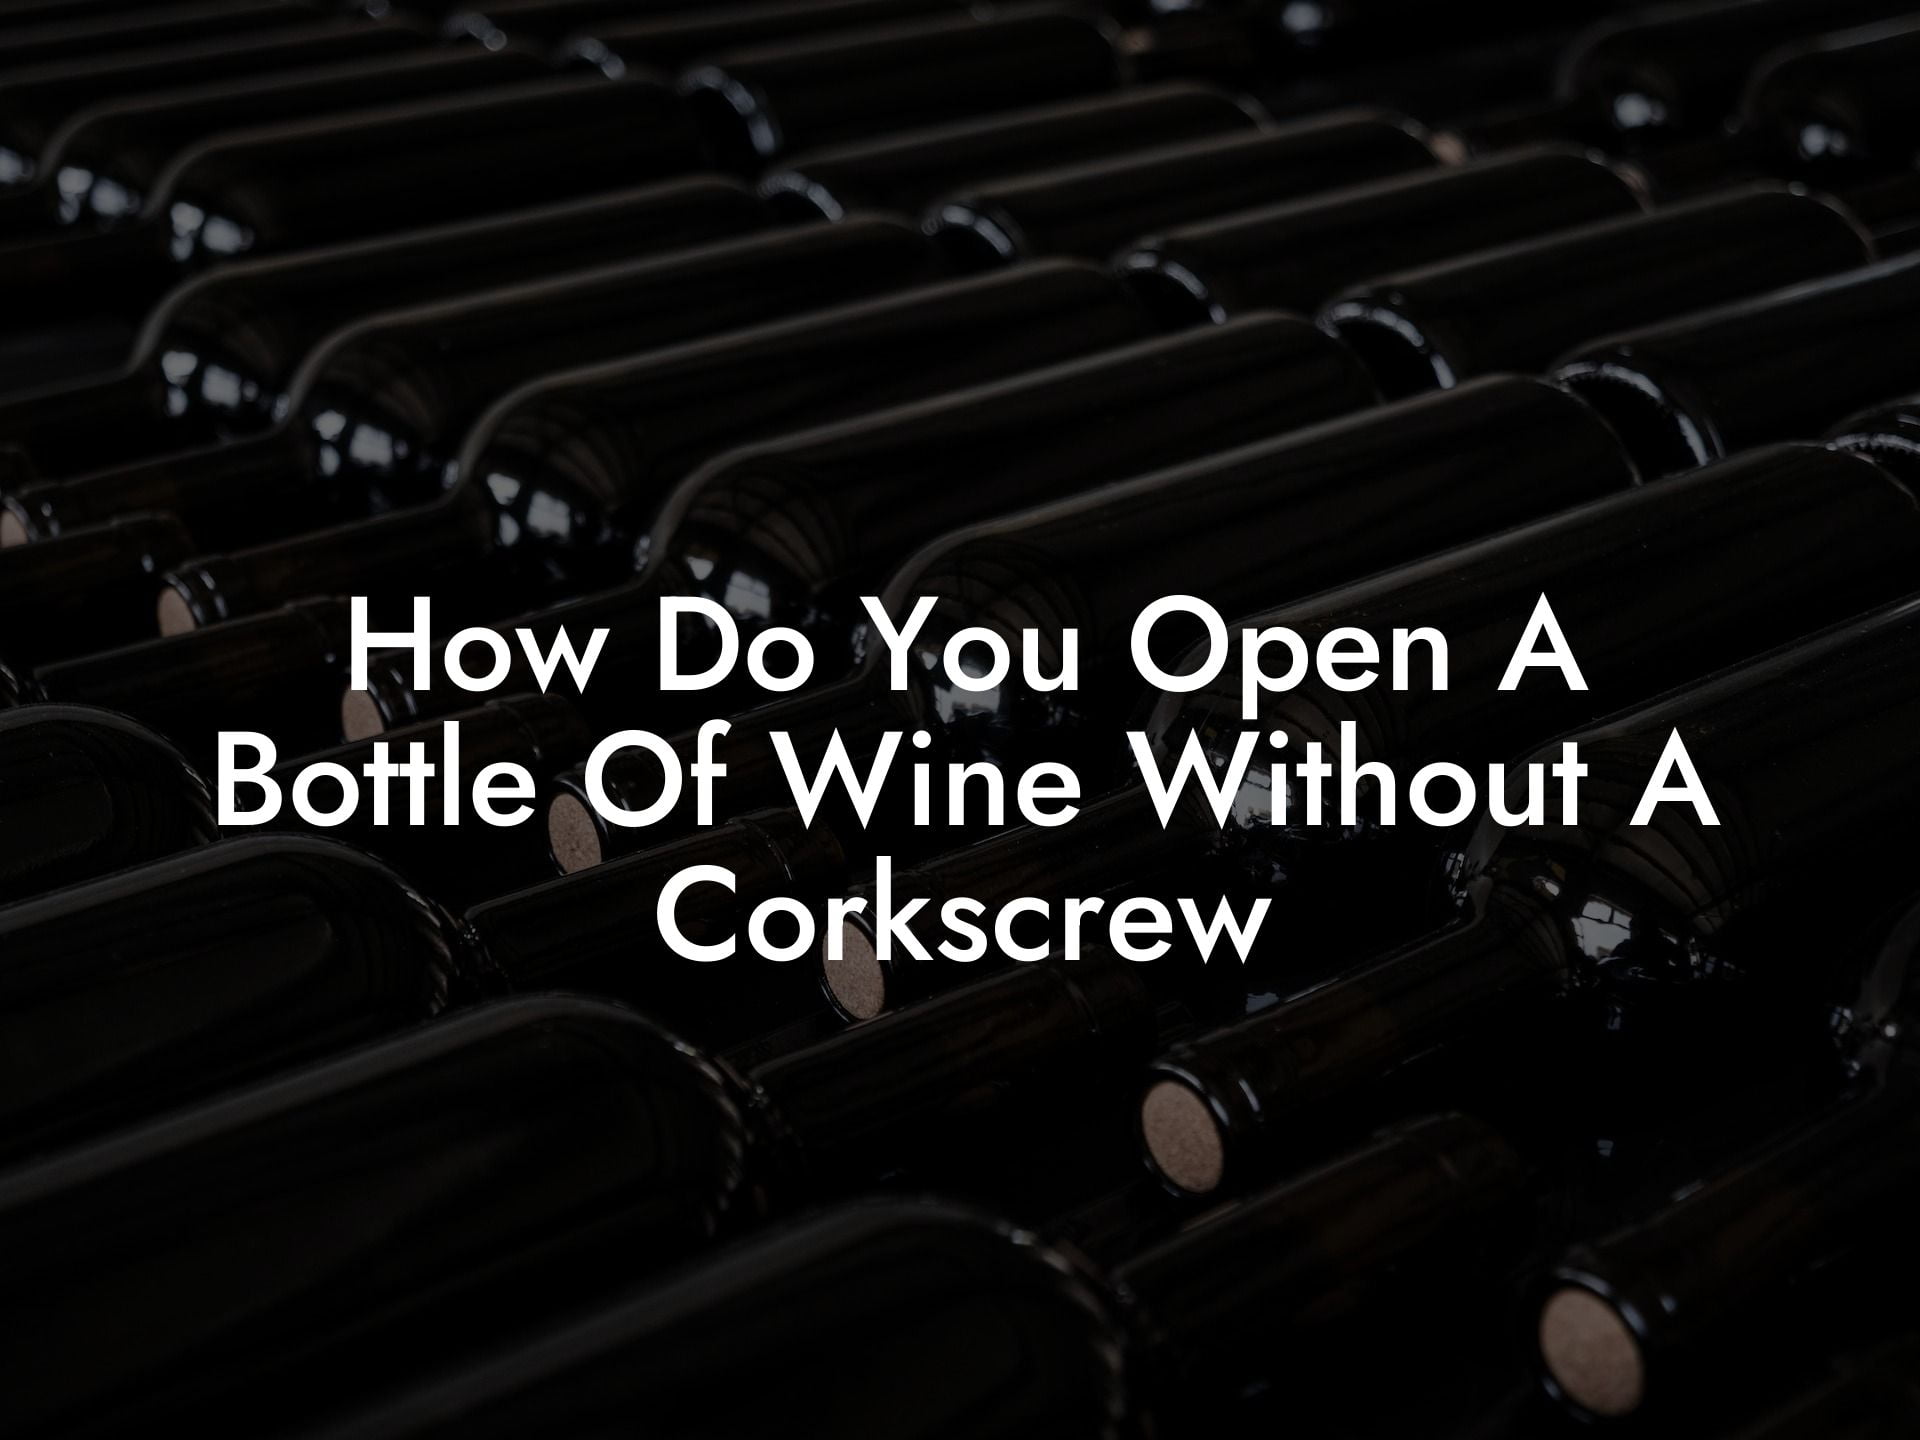 How Do You Open A Bottle Of Wine Without A Corkscrew